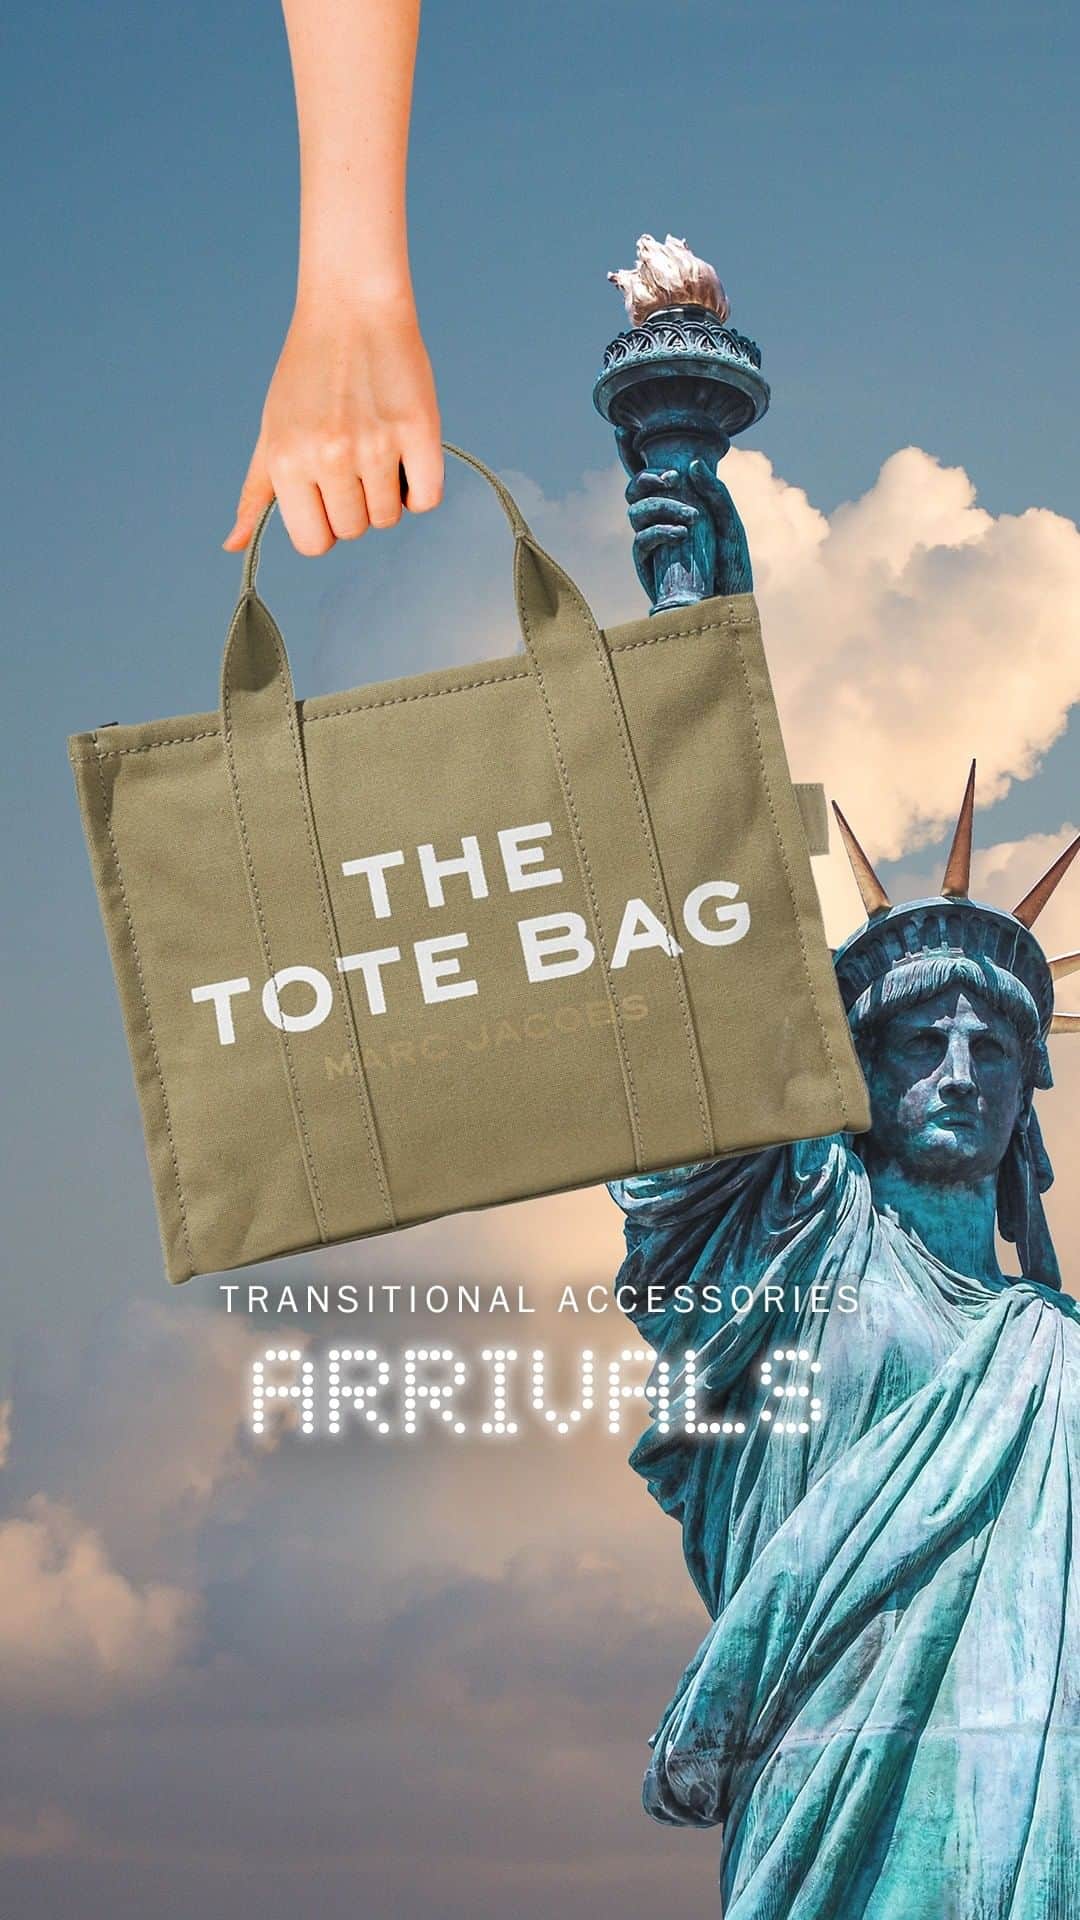 DFS & T Galleriaのインスタグラム：「Good evening passengers, we are ready for landing! Please proceed to the baggage claim to retrieve your bags upon arrival.​  Invest in one #versatile bag while flying so you can head straight from the airport to the beach in Bali or to tour of St. Mark’s Basilica in Venice. Flying and packing for various vacation destinations has never been so easy!​  Which bag will be your travelling companion on your upcoming trip?​  #DFSOfficial​ #DFSTravel​ #Fashion​ #Travel」